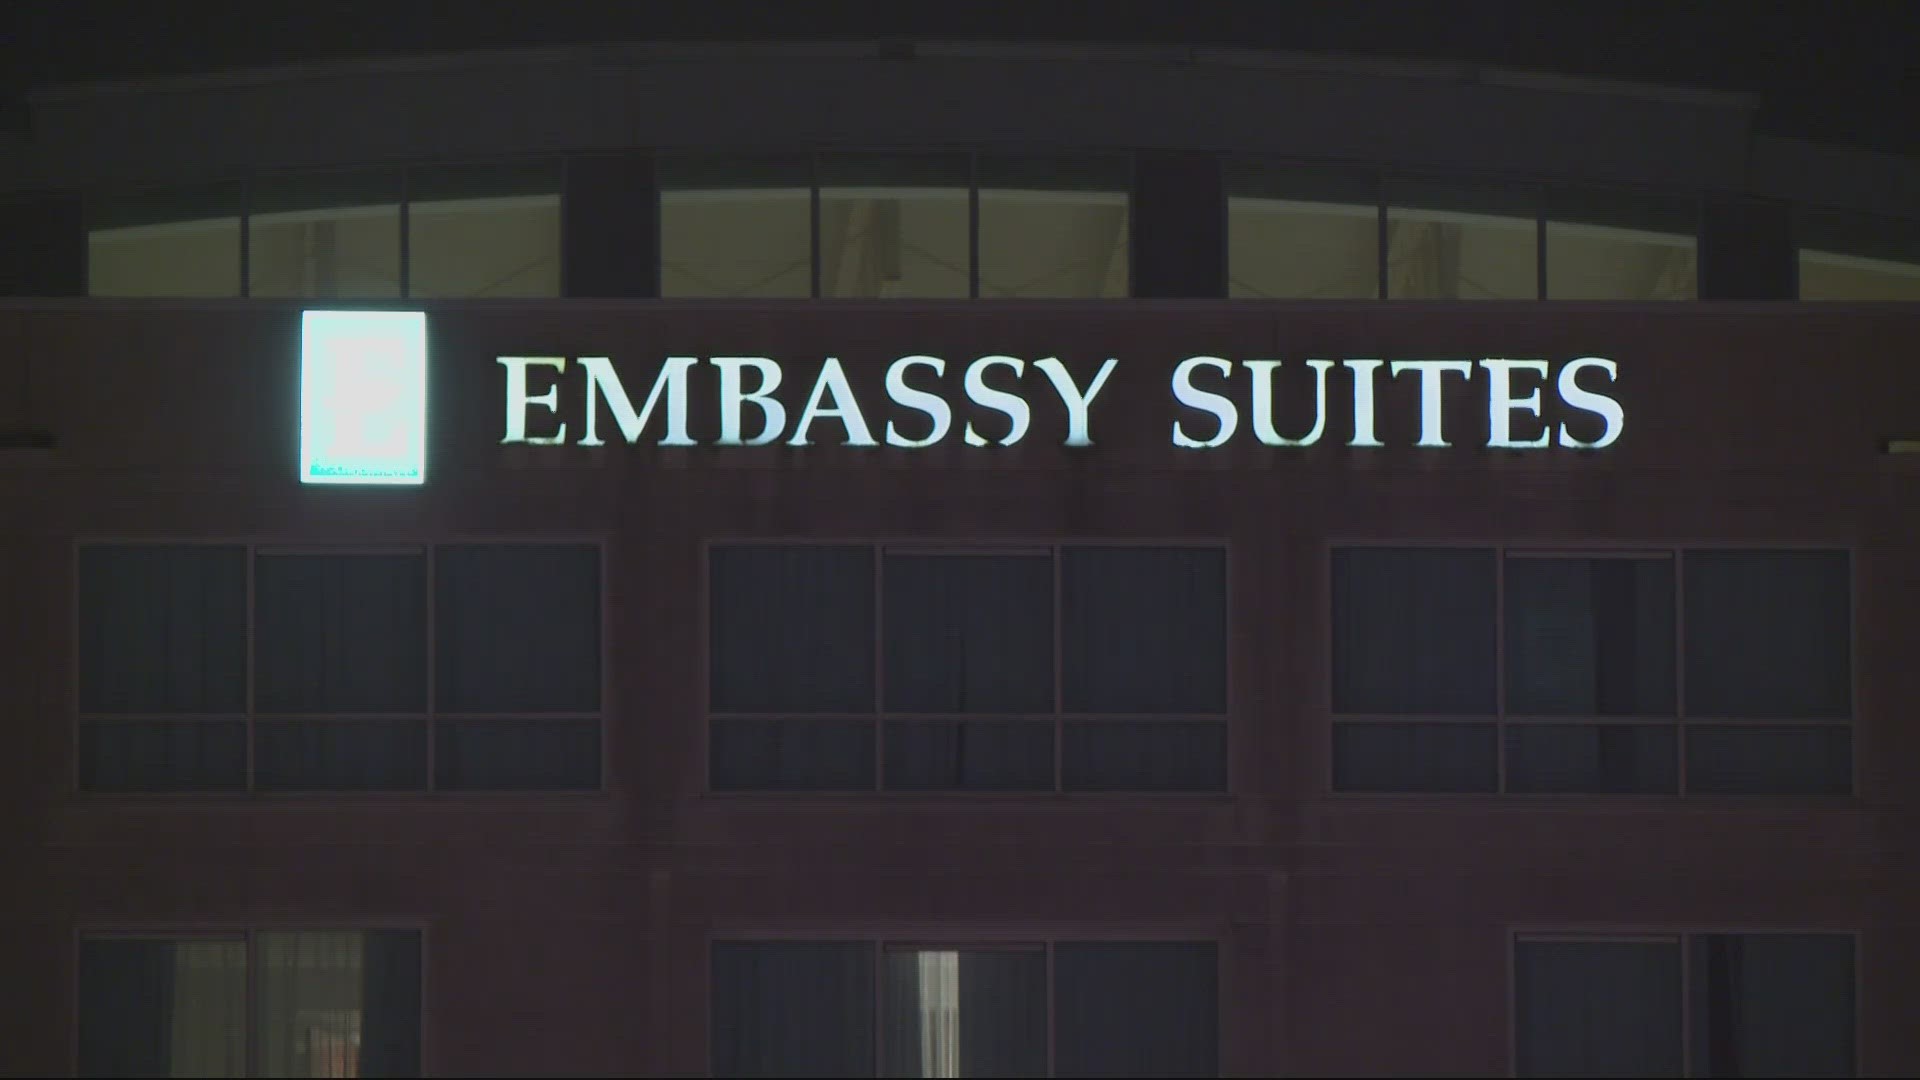 Police said on Friday two others were hurt in a shooting at the Embassy Suites this week. Two people were killed, along with those hurt.